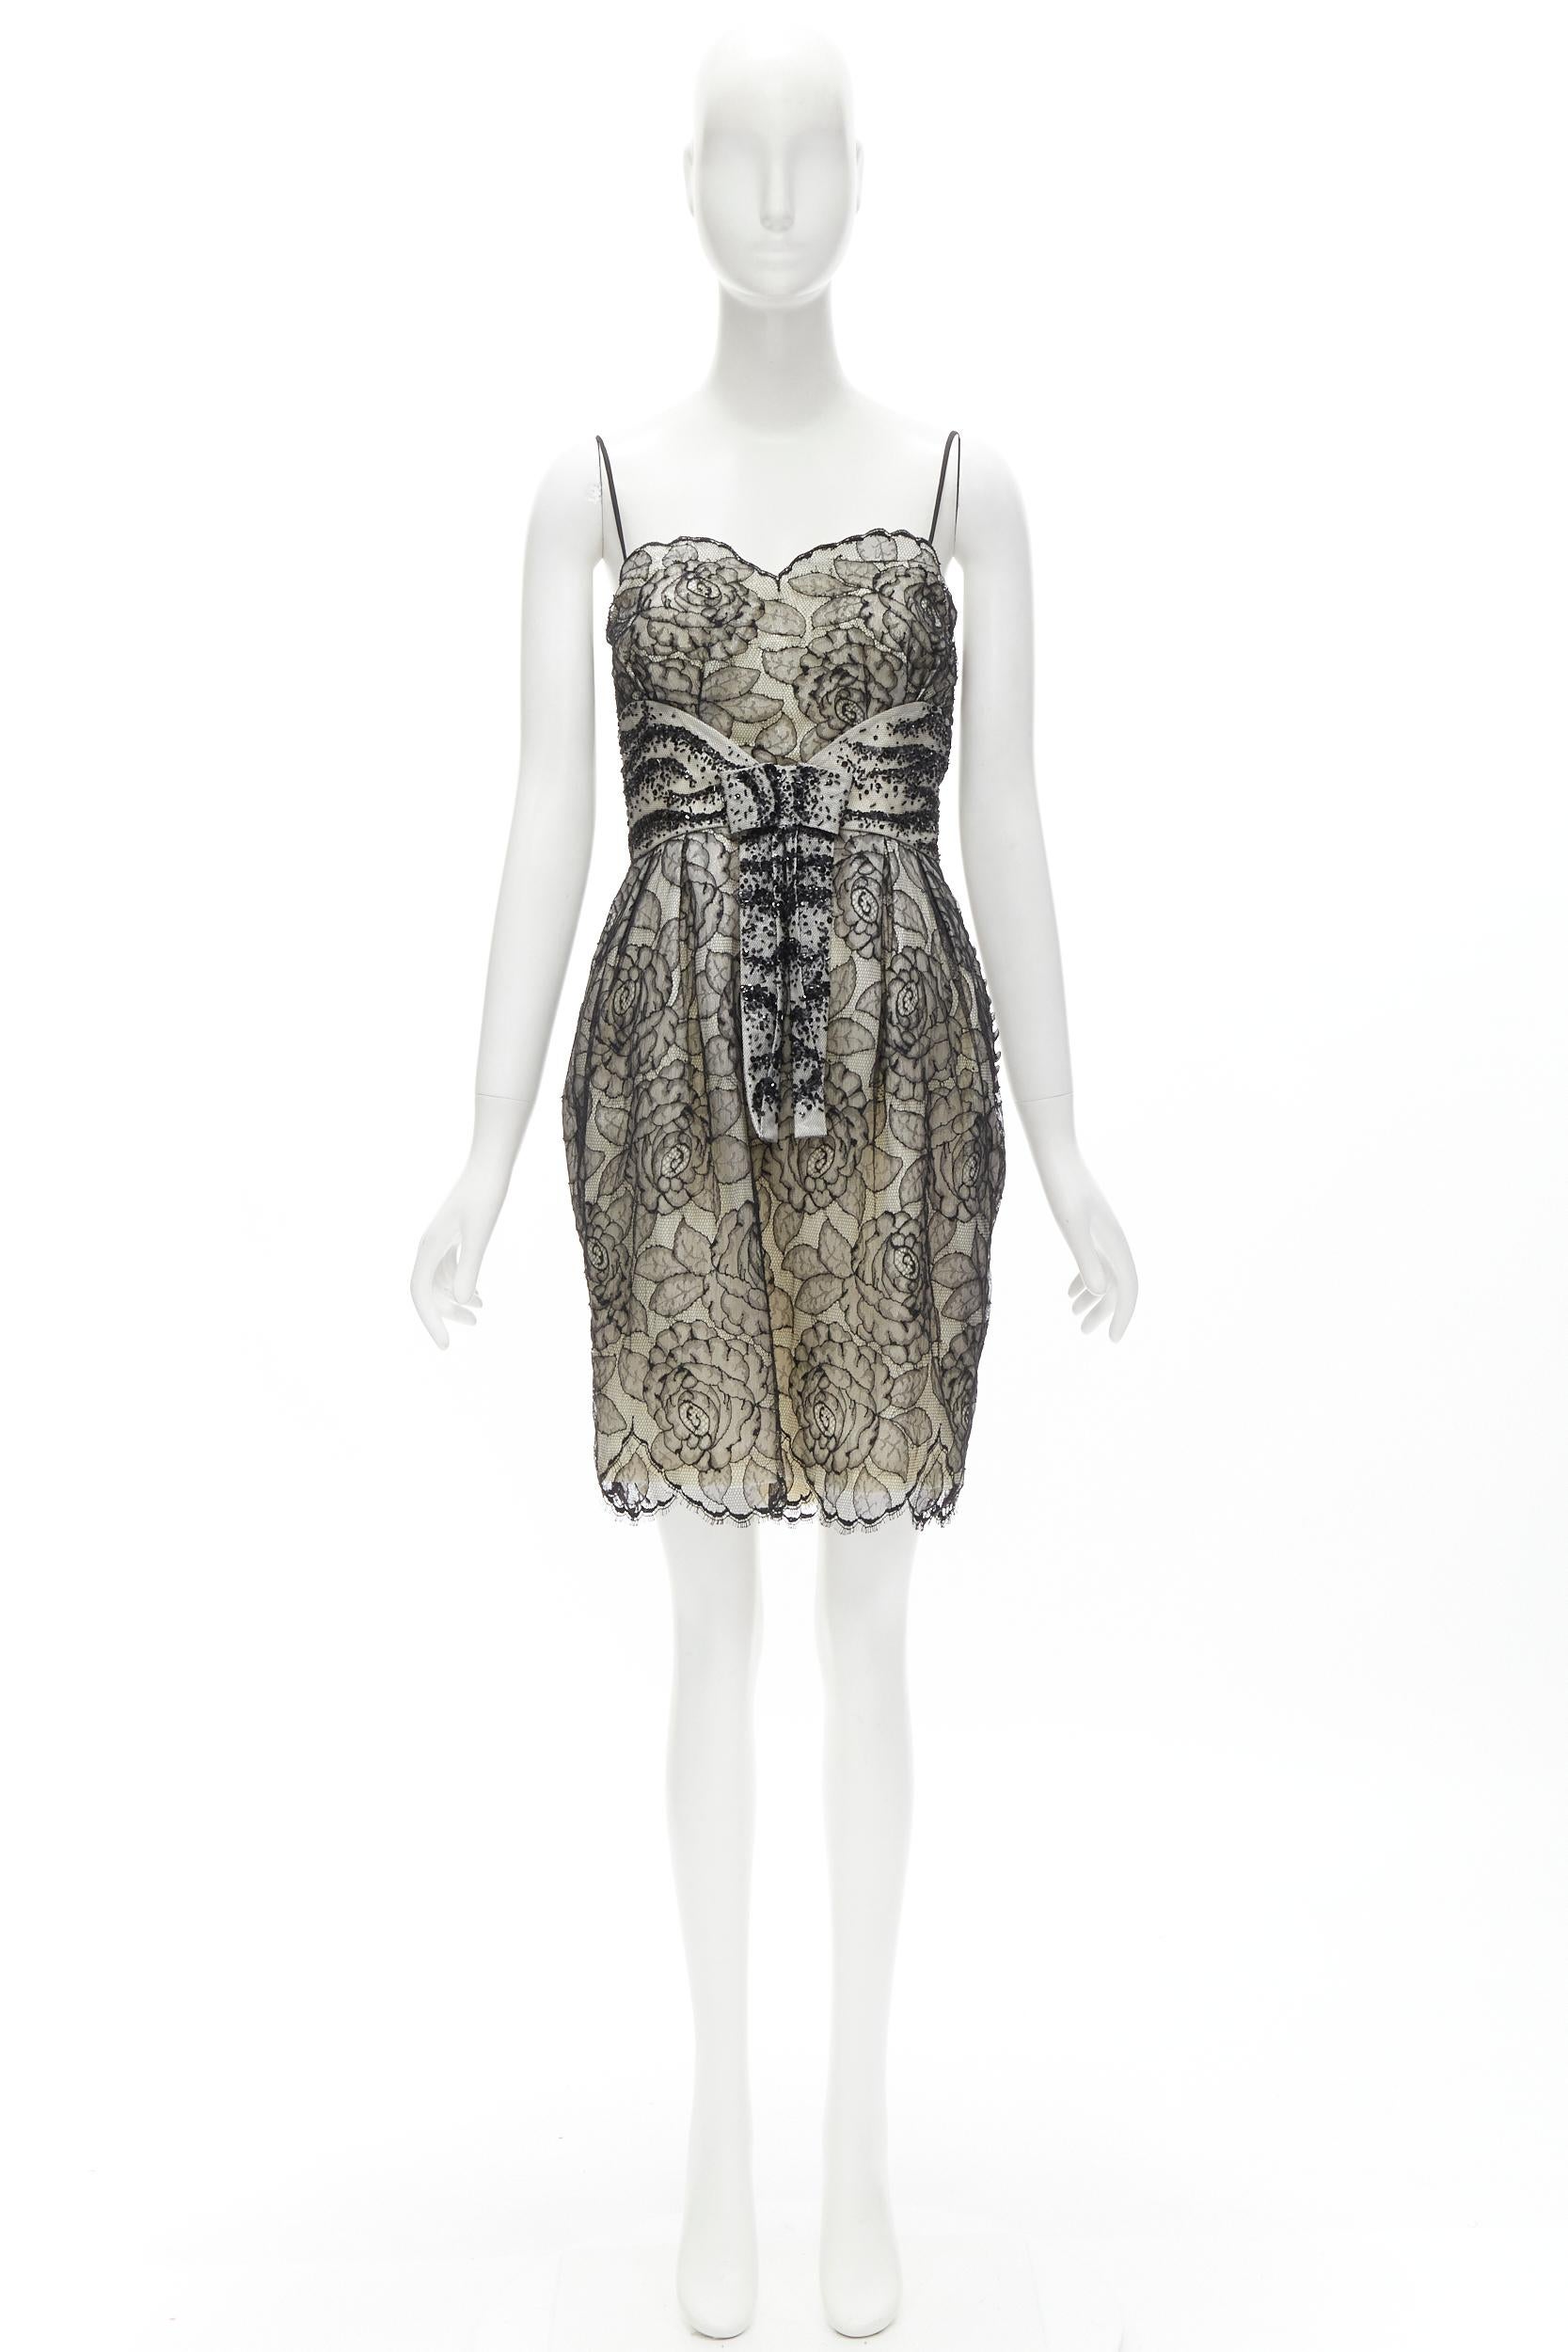 CHRISTIAN DIOR JOHN GALLIANO 2011 Runway lace bead embellished bow dress FR36 S For Sale 5